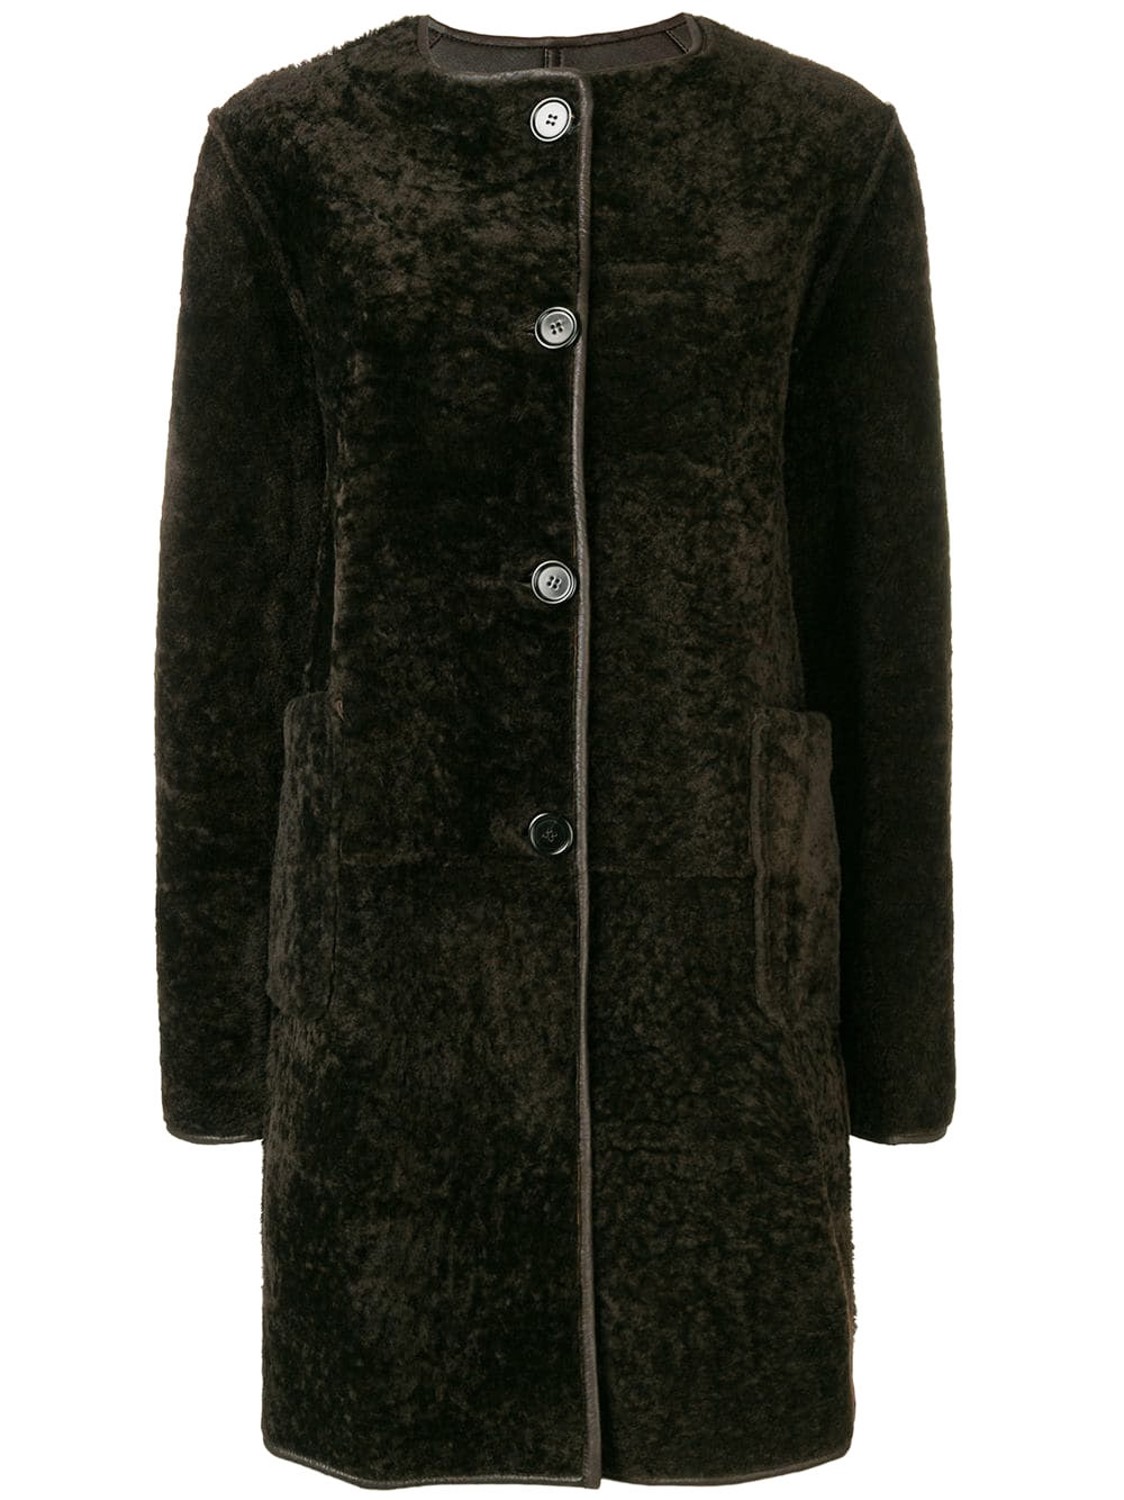 shop Marni  Coats: Coat Marni, in shearling, crewneck, closure with buttons on front, pockets on front, mid-lenght, reversible, in dark earth color. 

Composition: 100% shearling. number 1347